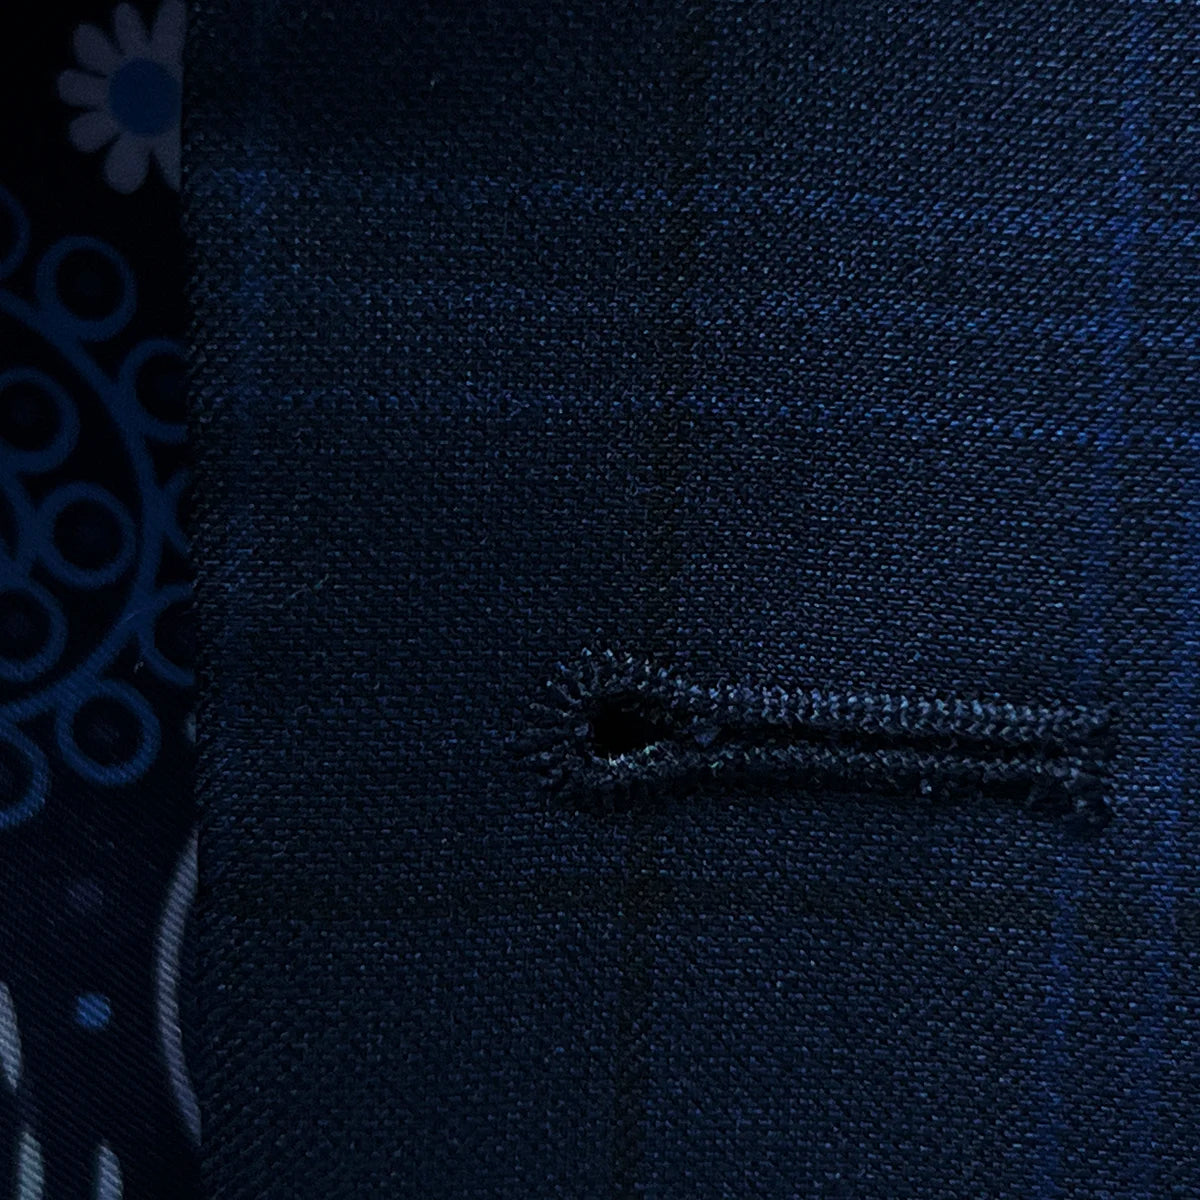 Detailed view of the buttonhole stitching on the dark blue windowpane men's sport coat featuring royal blue accent stitching.